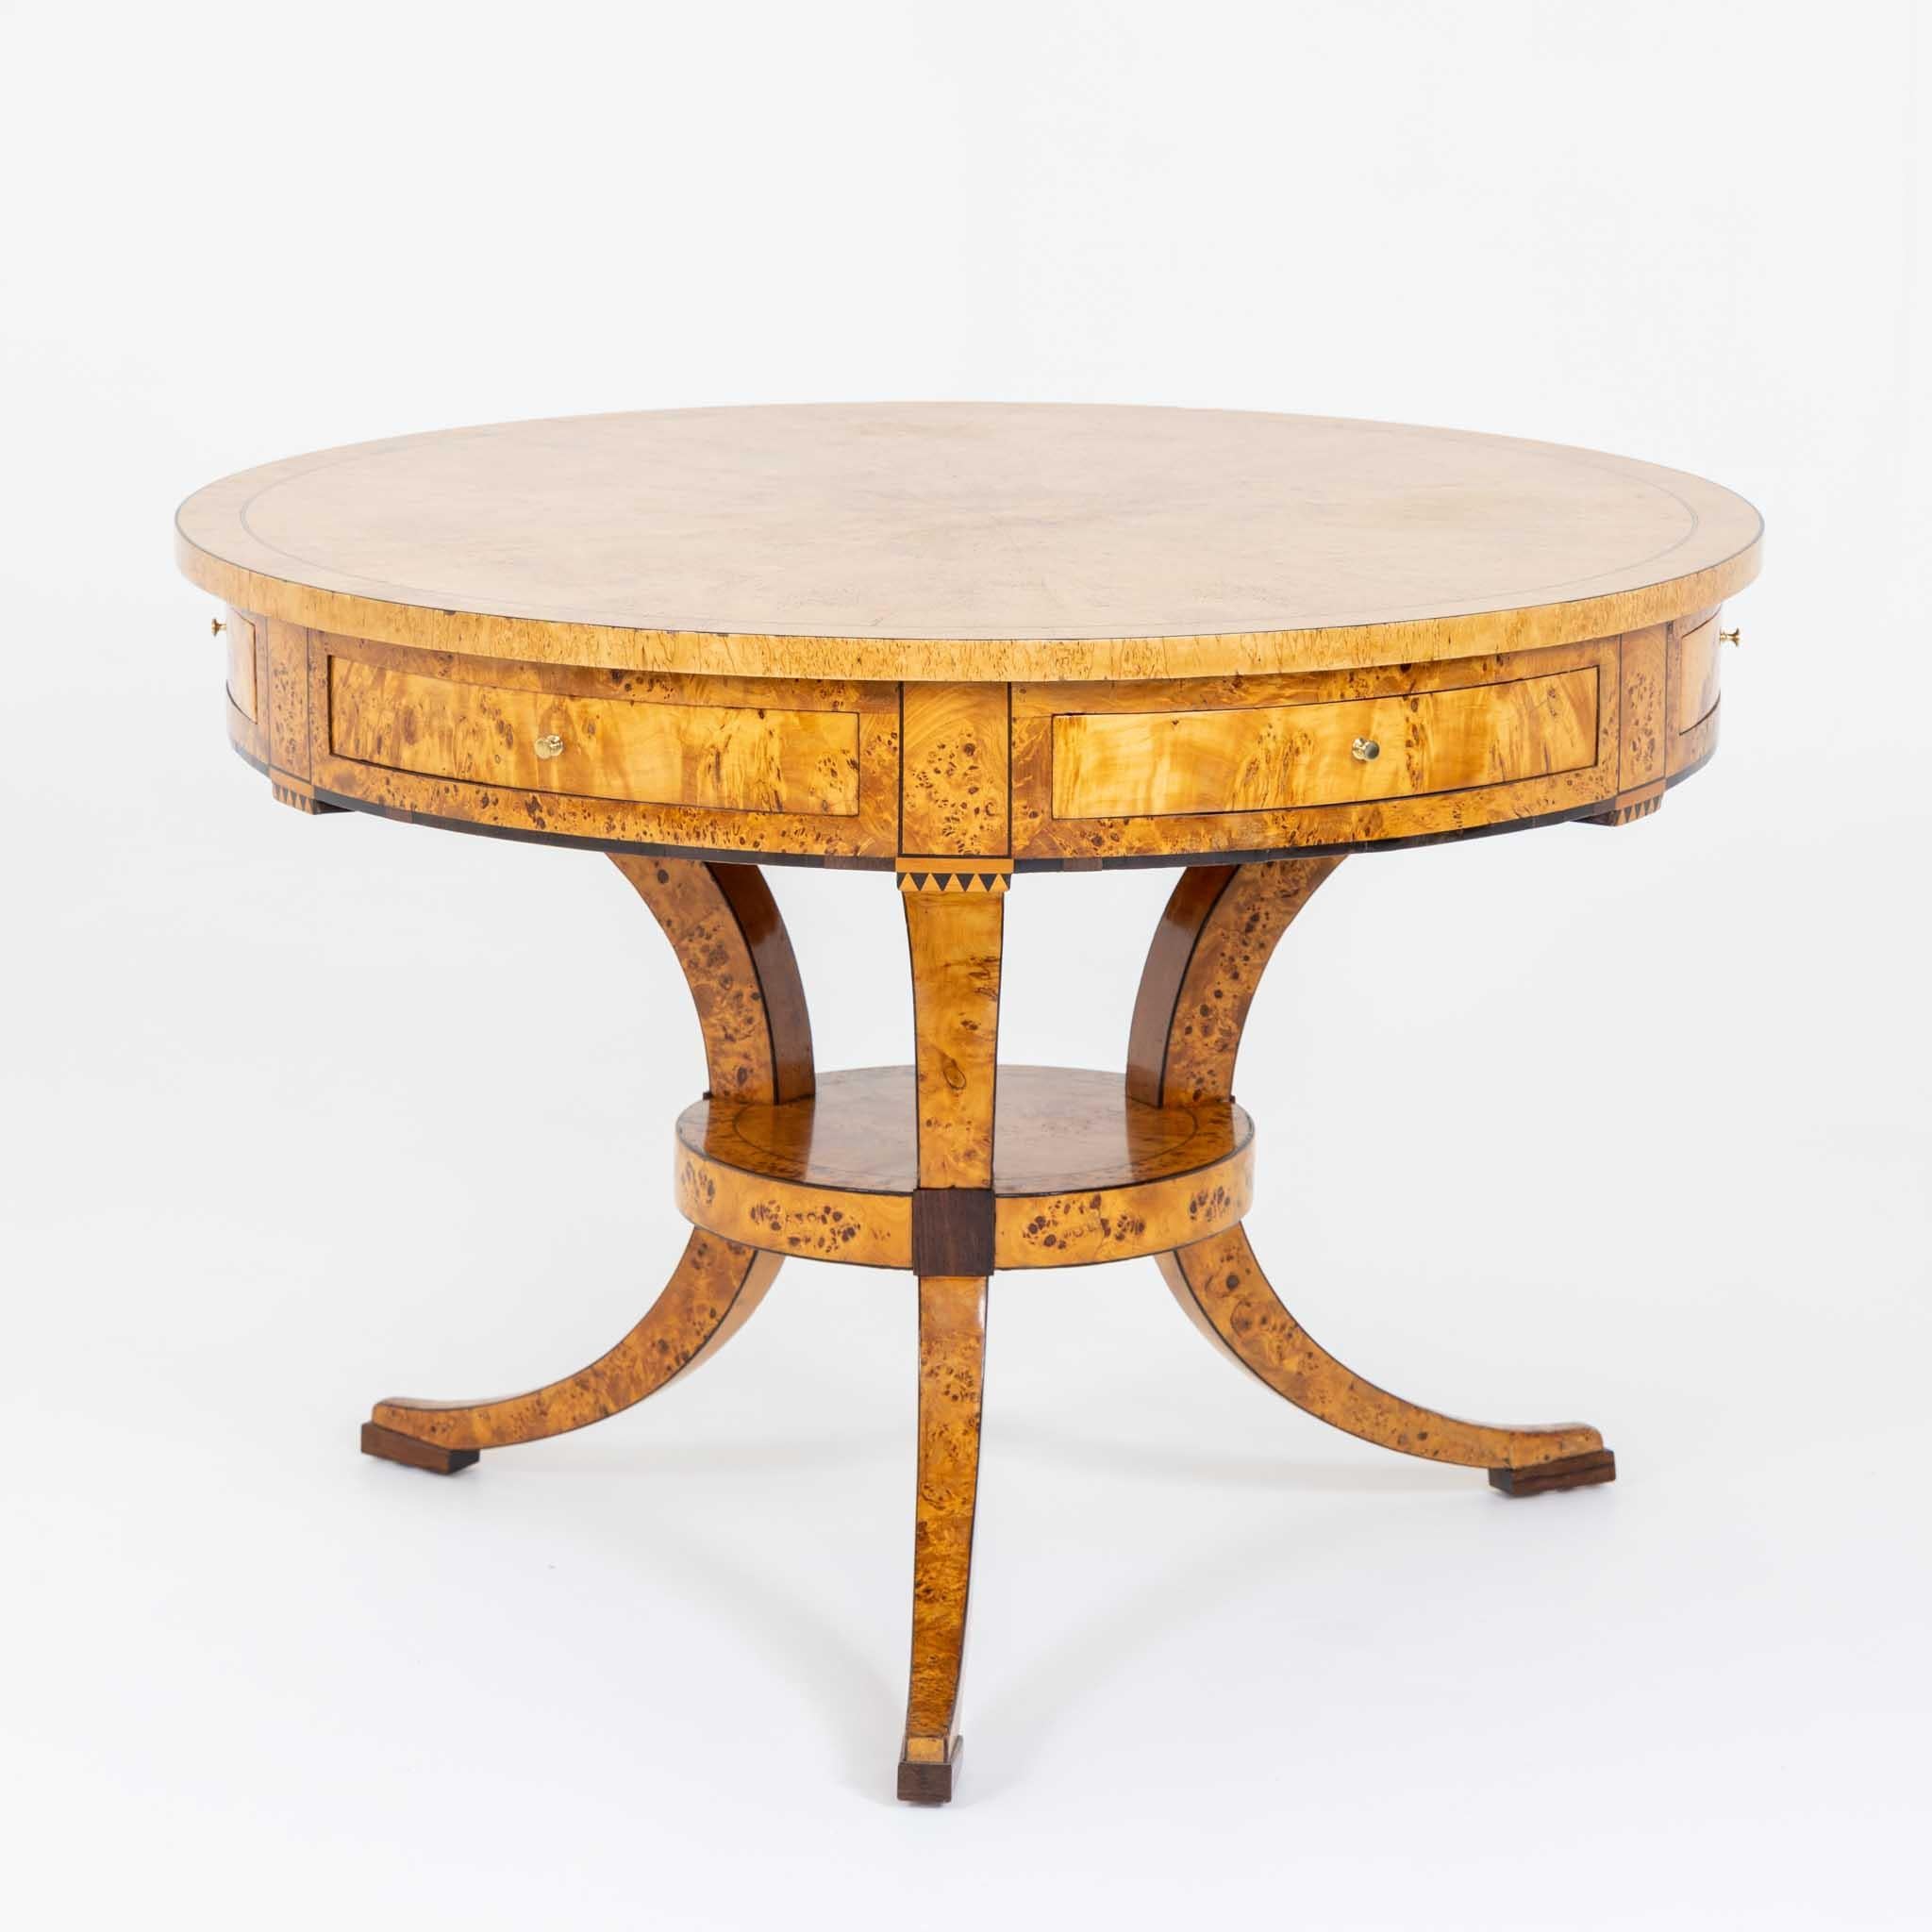 Biedermeier Game Table in Birch, Baltic States, early 19th Century For Sale 8